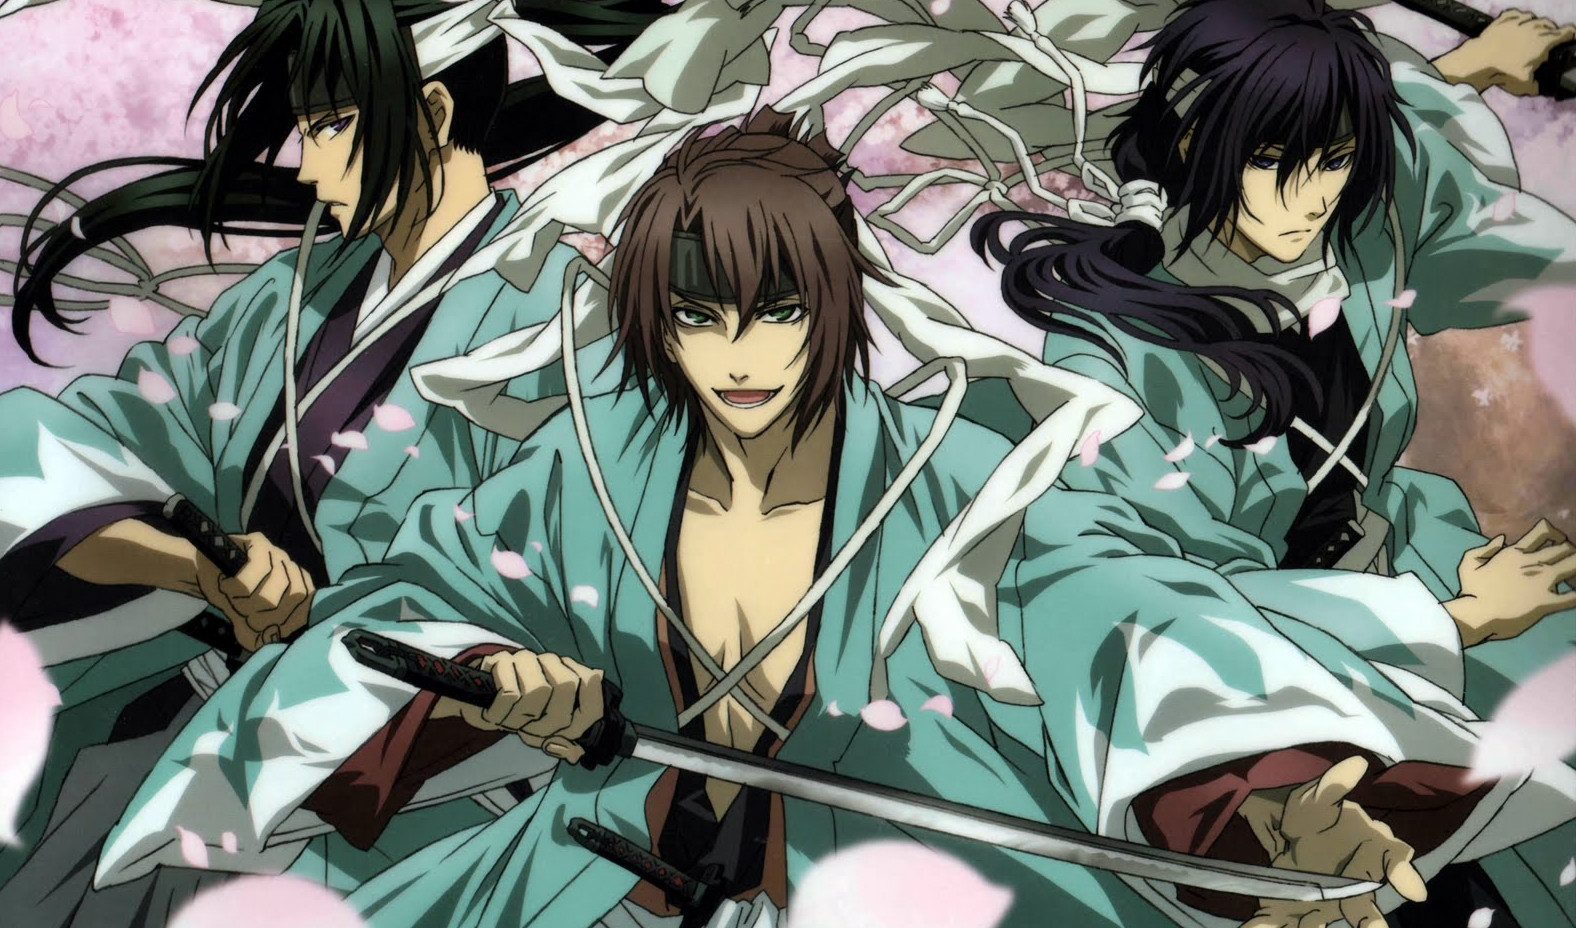 Gloczus to Release Hakuoki Otome Game on iOS and Android